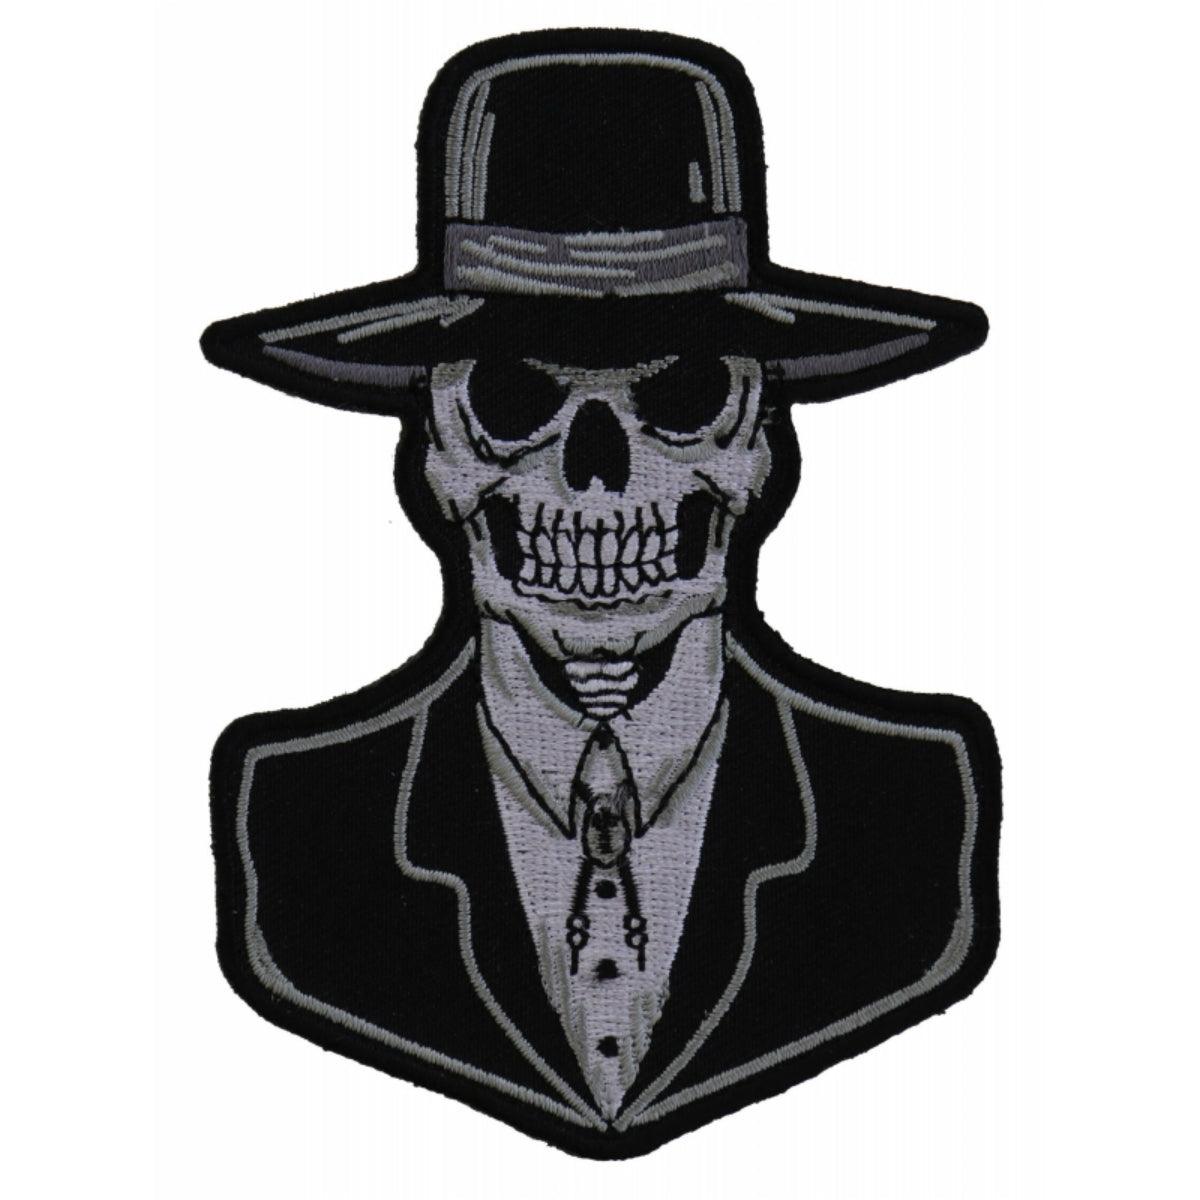 Daniel Smart Preacher Skull Embroidered Iron On Patch, 3 x 4.26 inches - American Legend Rider